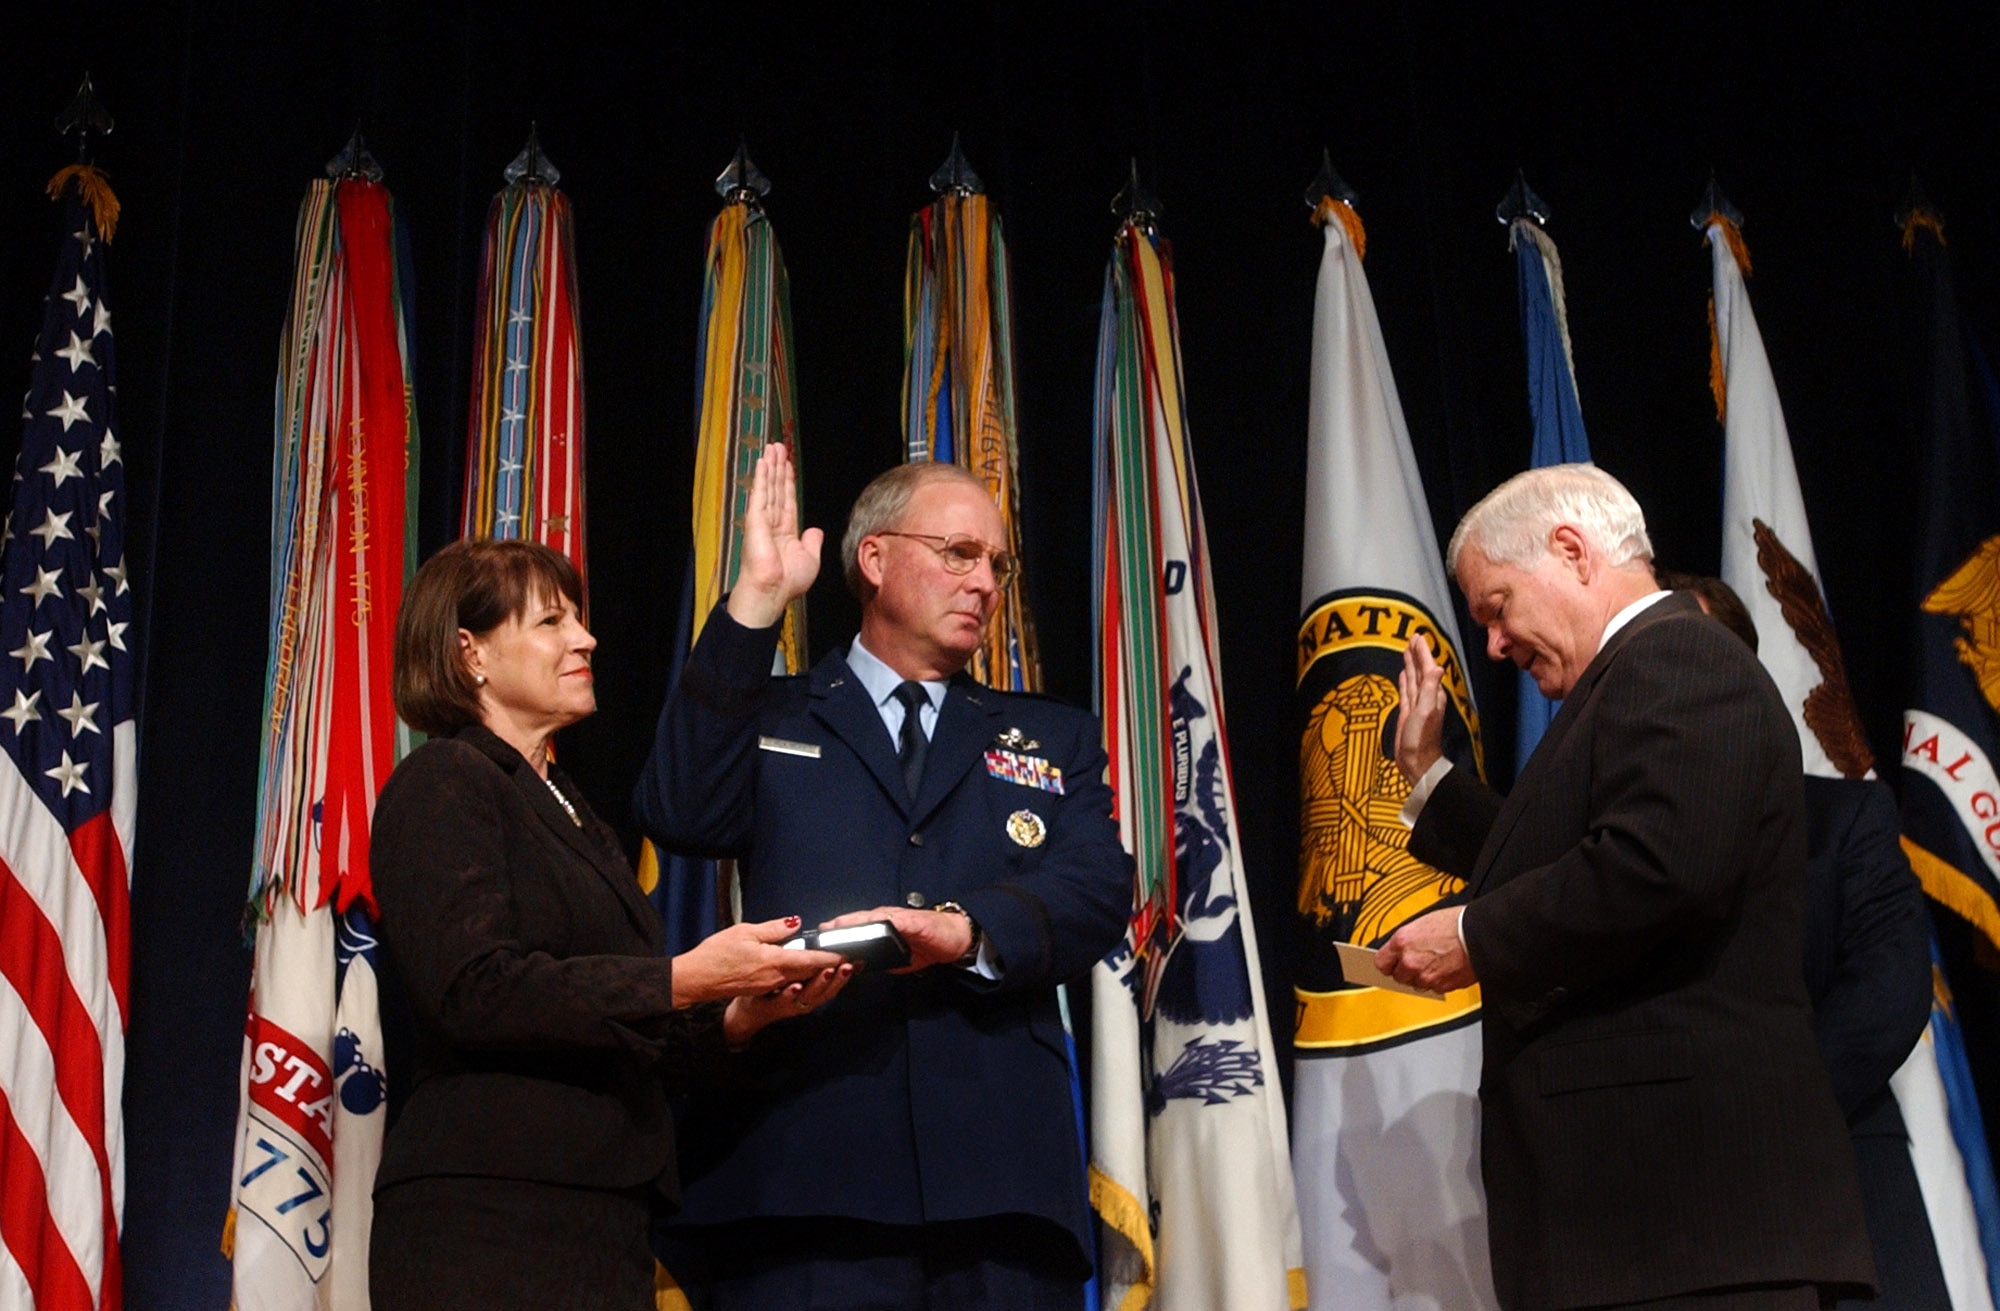 Gen. Craig R. McKinley is sworn in by Secretary of Defense Robert M. Gates as the 26th chief of the National Guard Bureau as his wife, Cheryl McKinley, holds a bible during a Nov. 17 ceremony at the Pentagon. General McKinley was also promoted to his current rank and is the first Guard officer to be promoted to the four-star rank. (U.S. Army photo/Staff Sgt. Jon Soucy)
